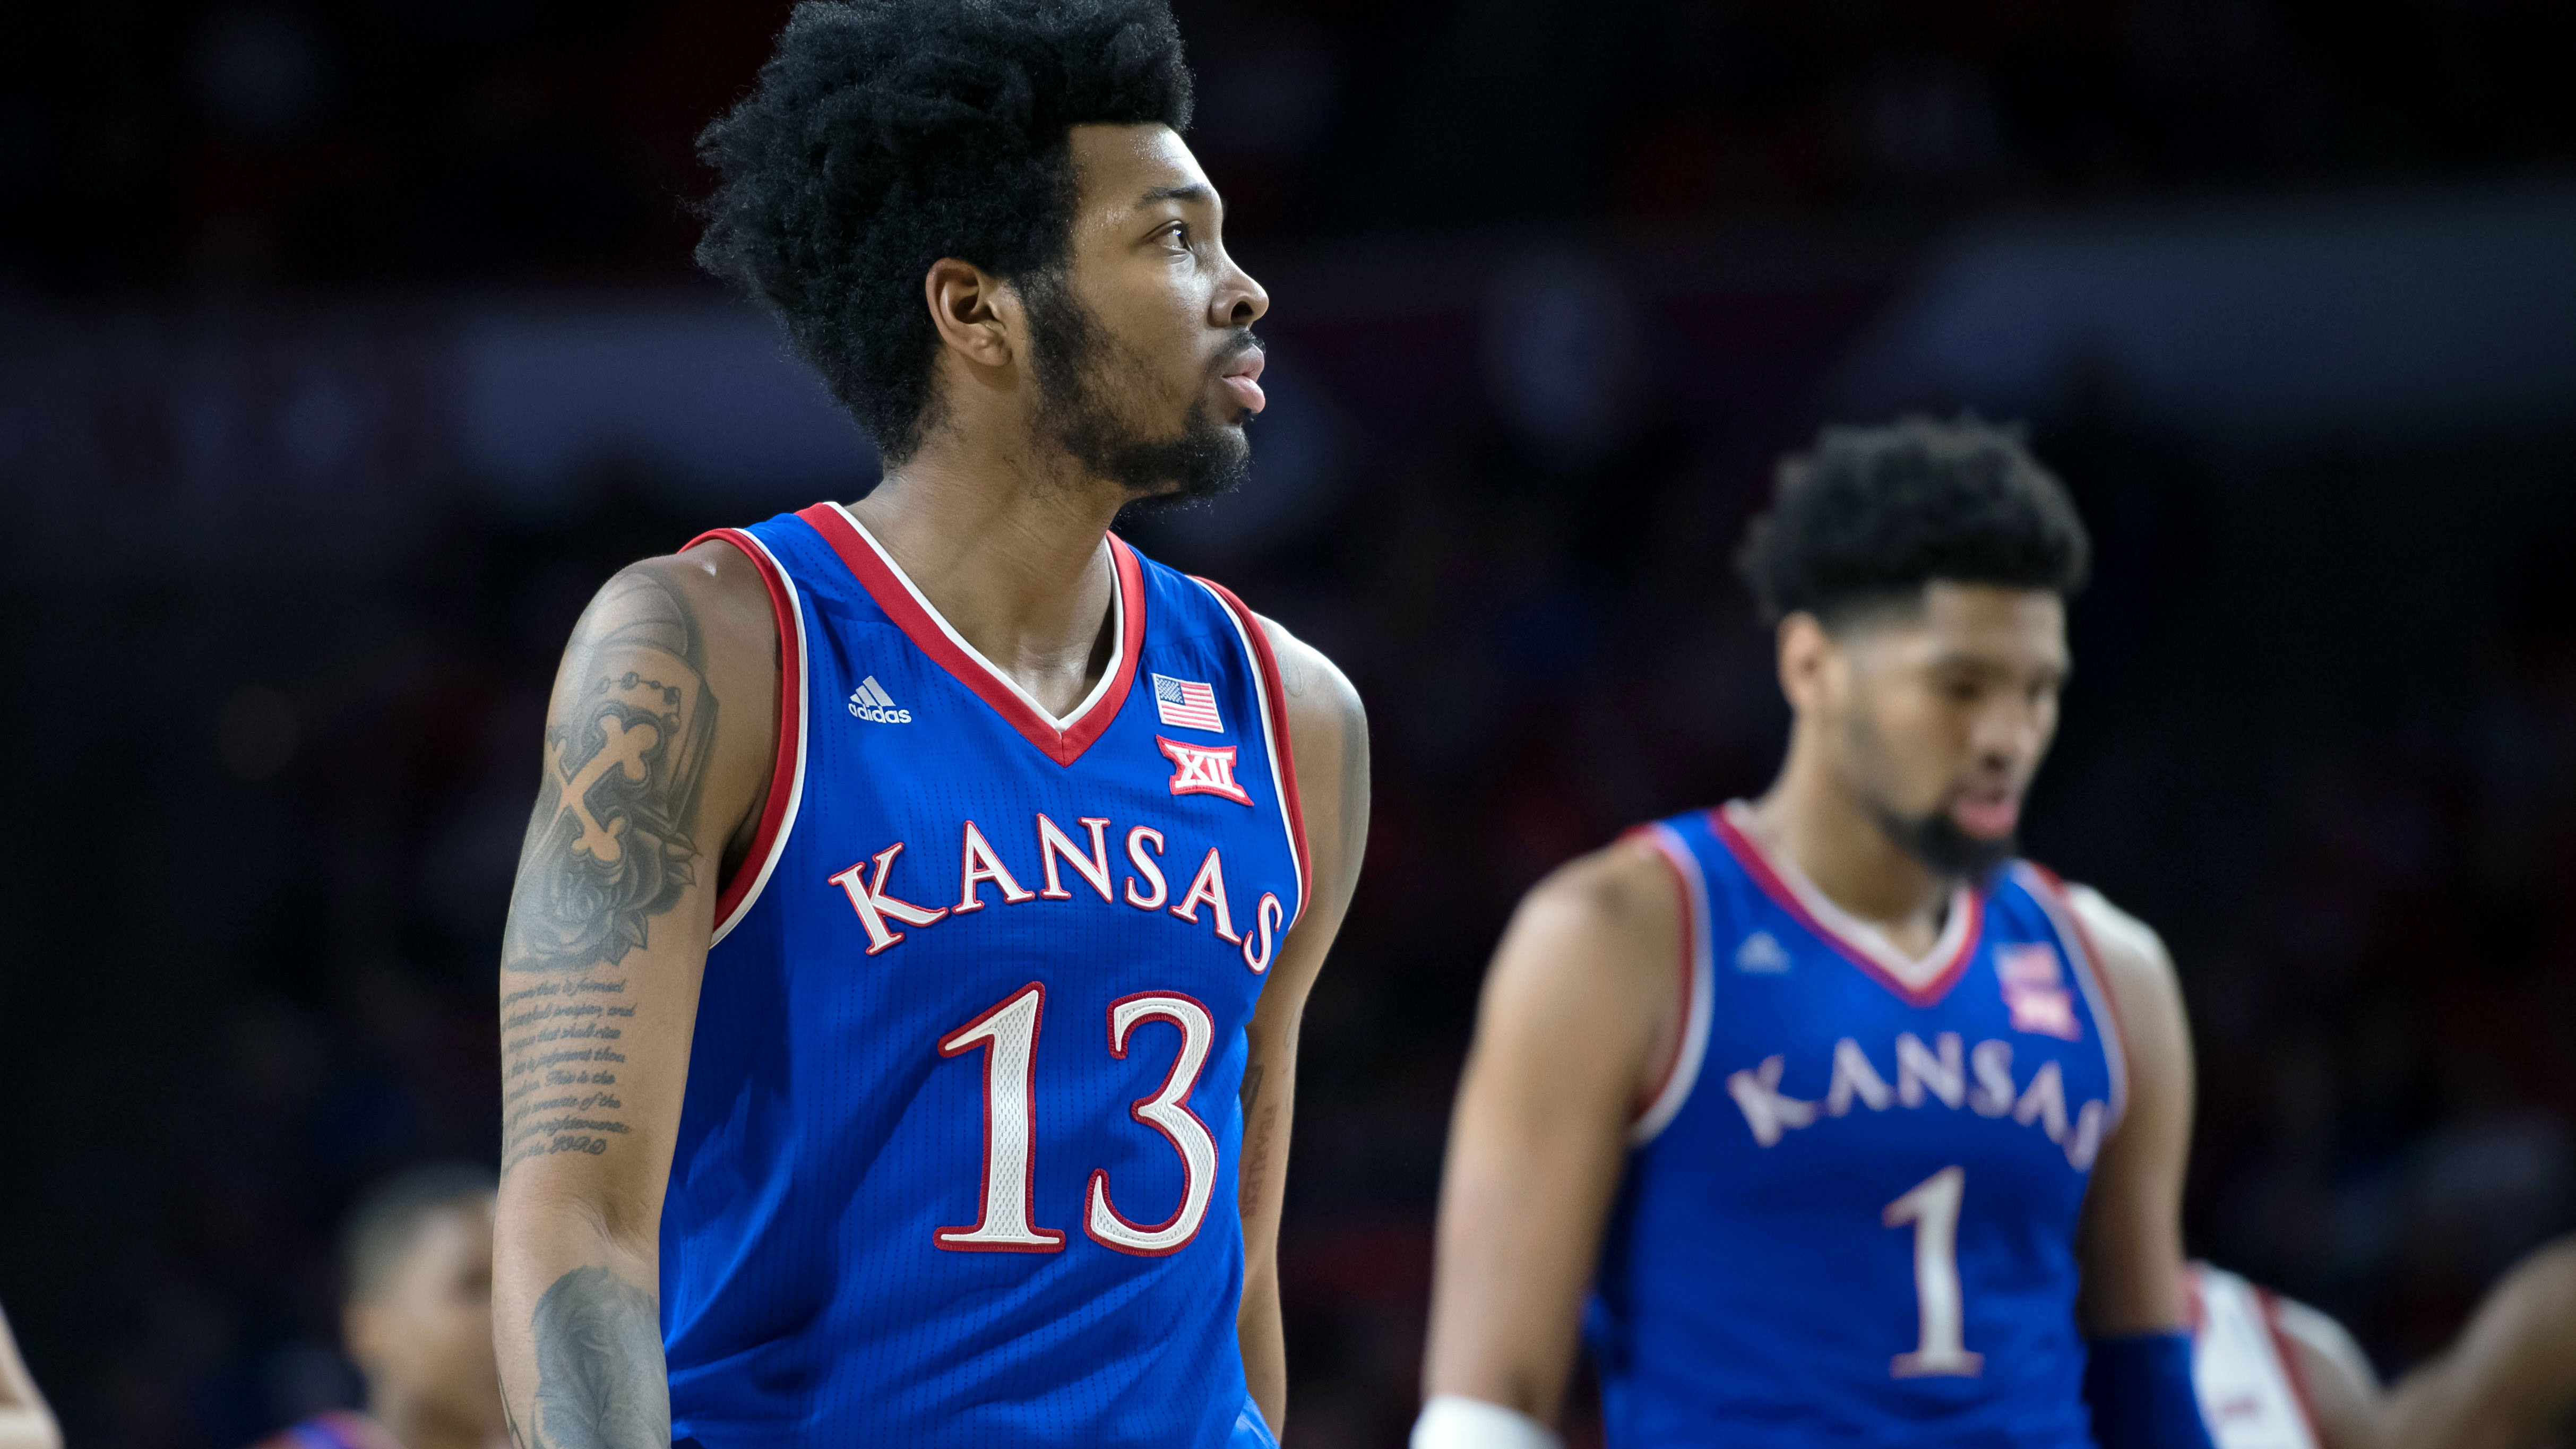 Kansas' 14-game Big 12 title streak ends with a thud